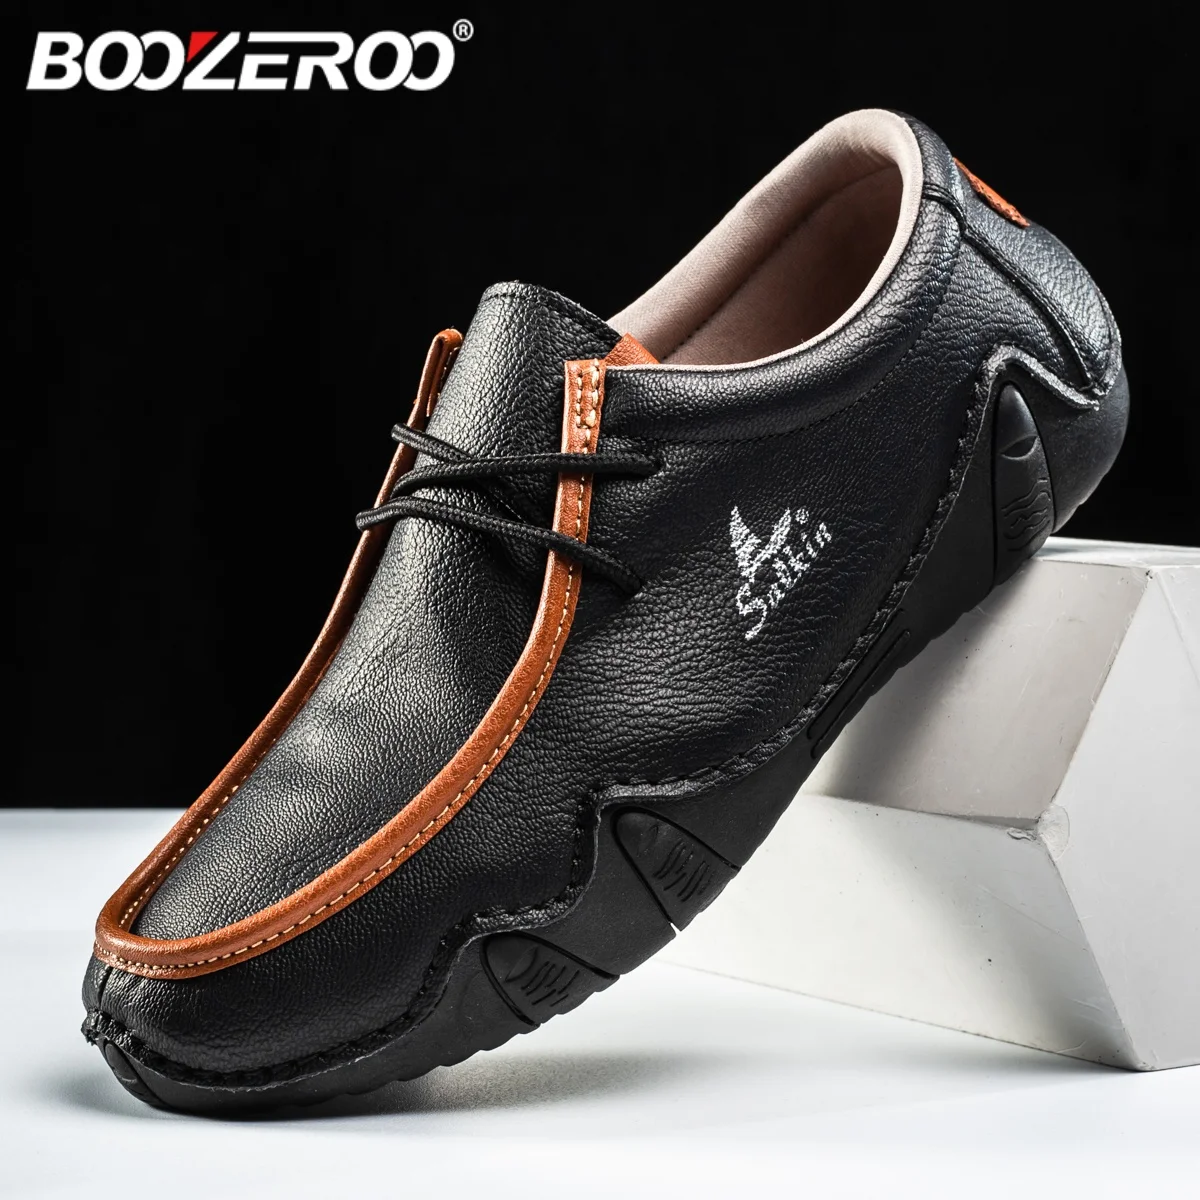 

BOOZEROO New Casual Shoes for Men Comfortable Lace Up Male Flats Lightweight Driving Sneaker